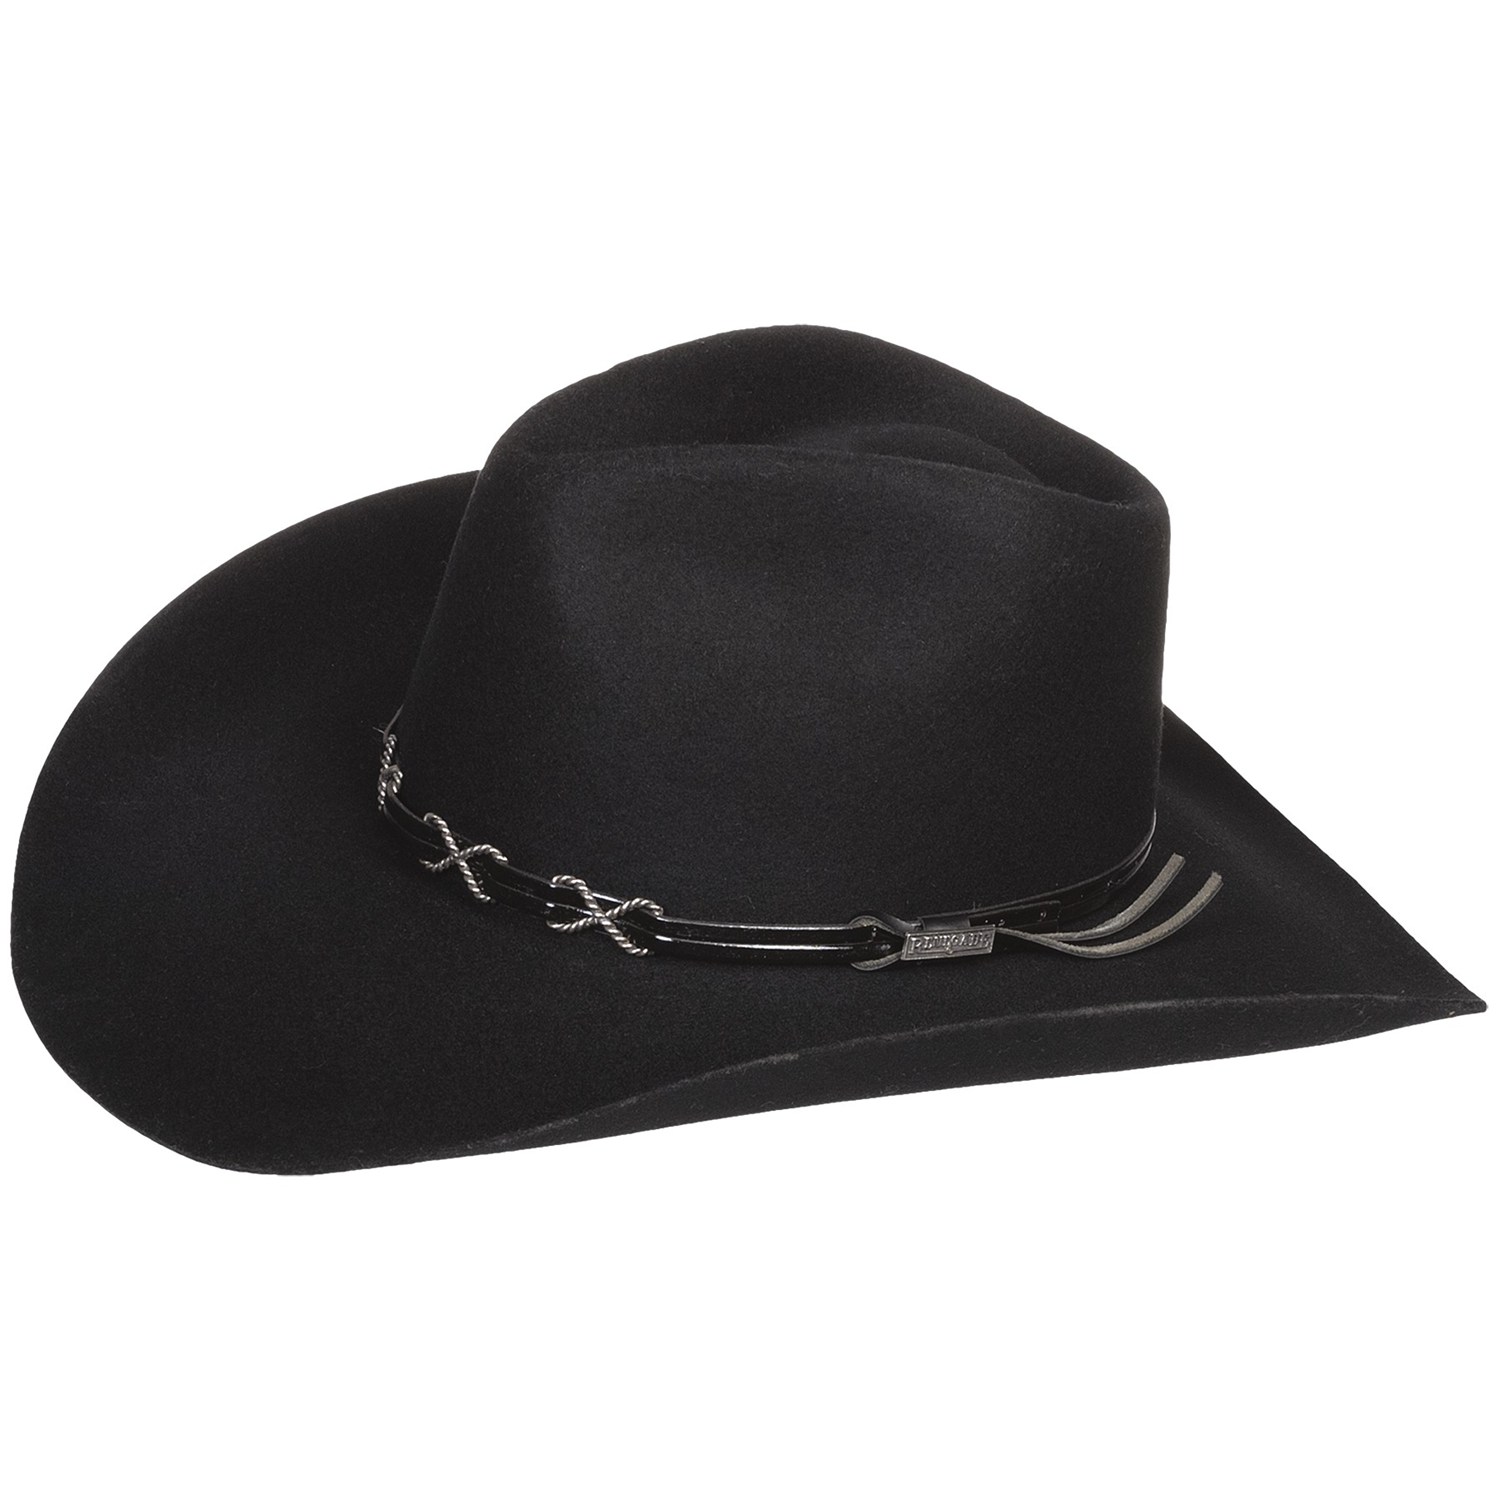 Men's Cowboy Hats up to 72% off at Sierra Trading Post